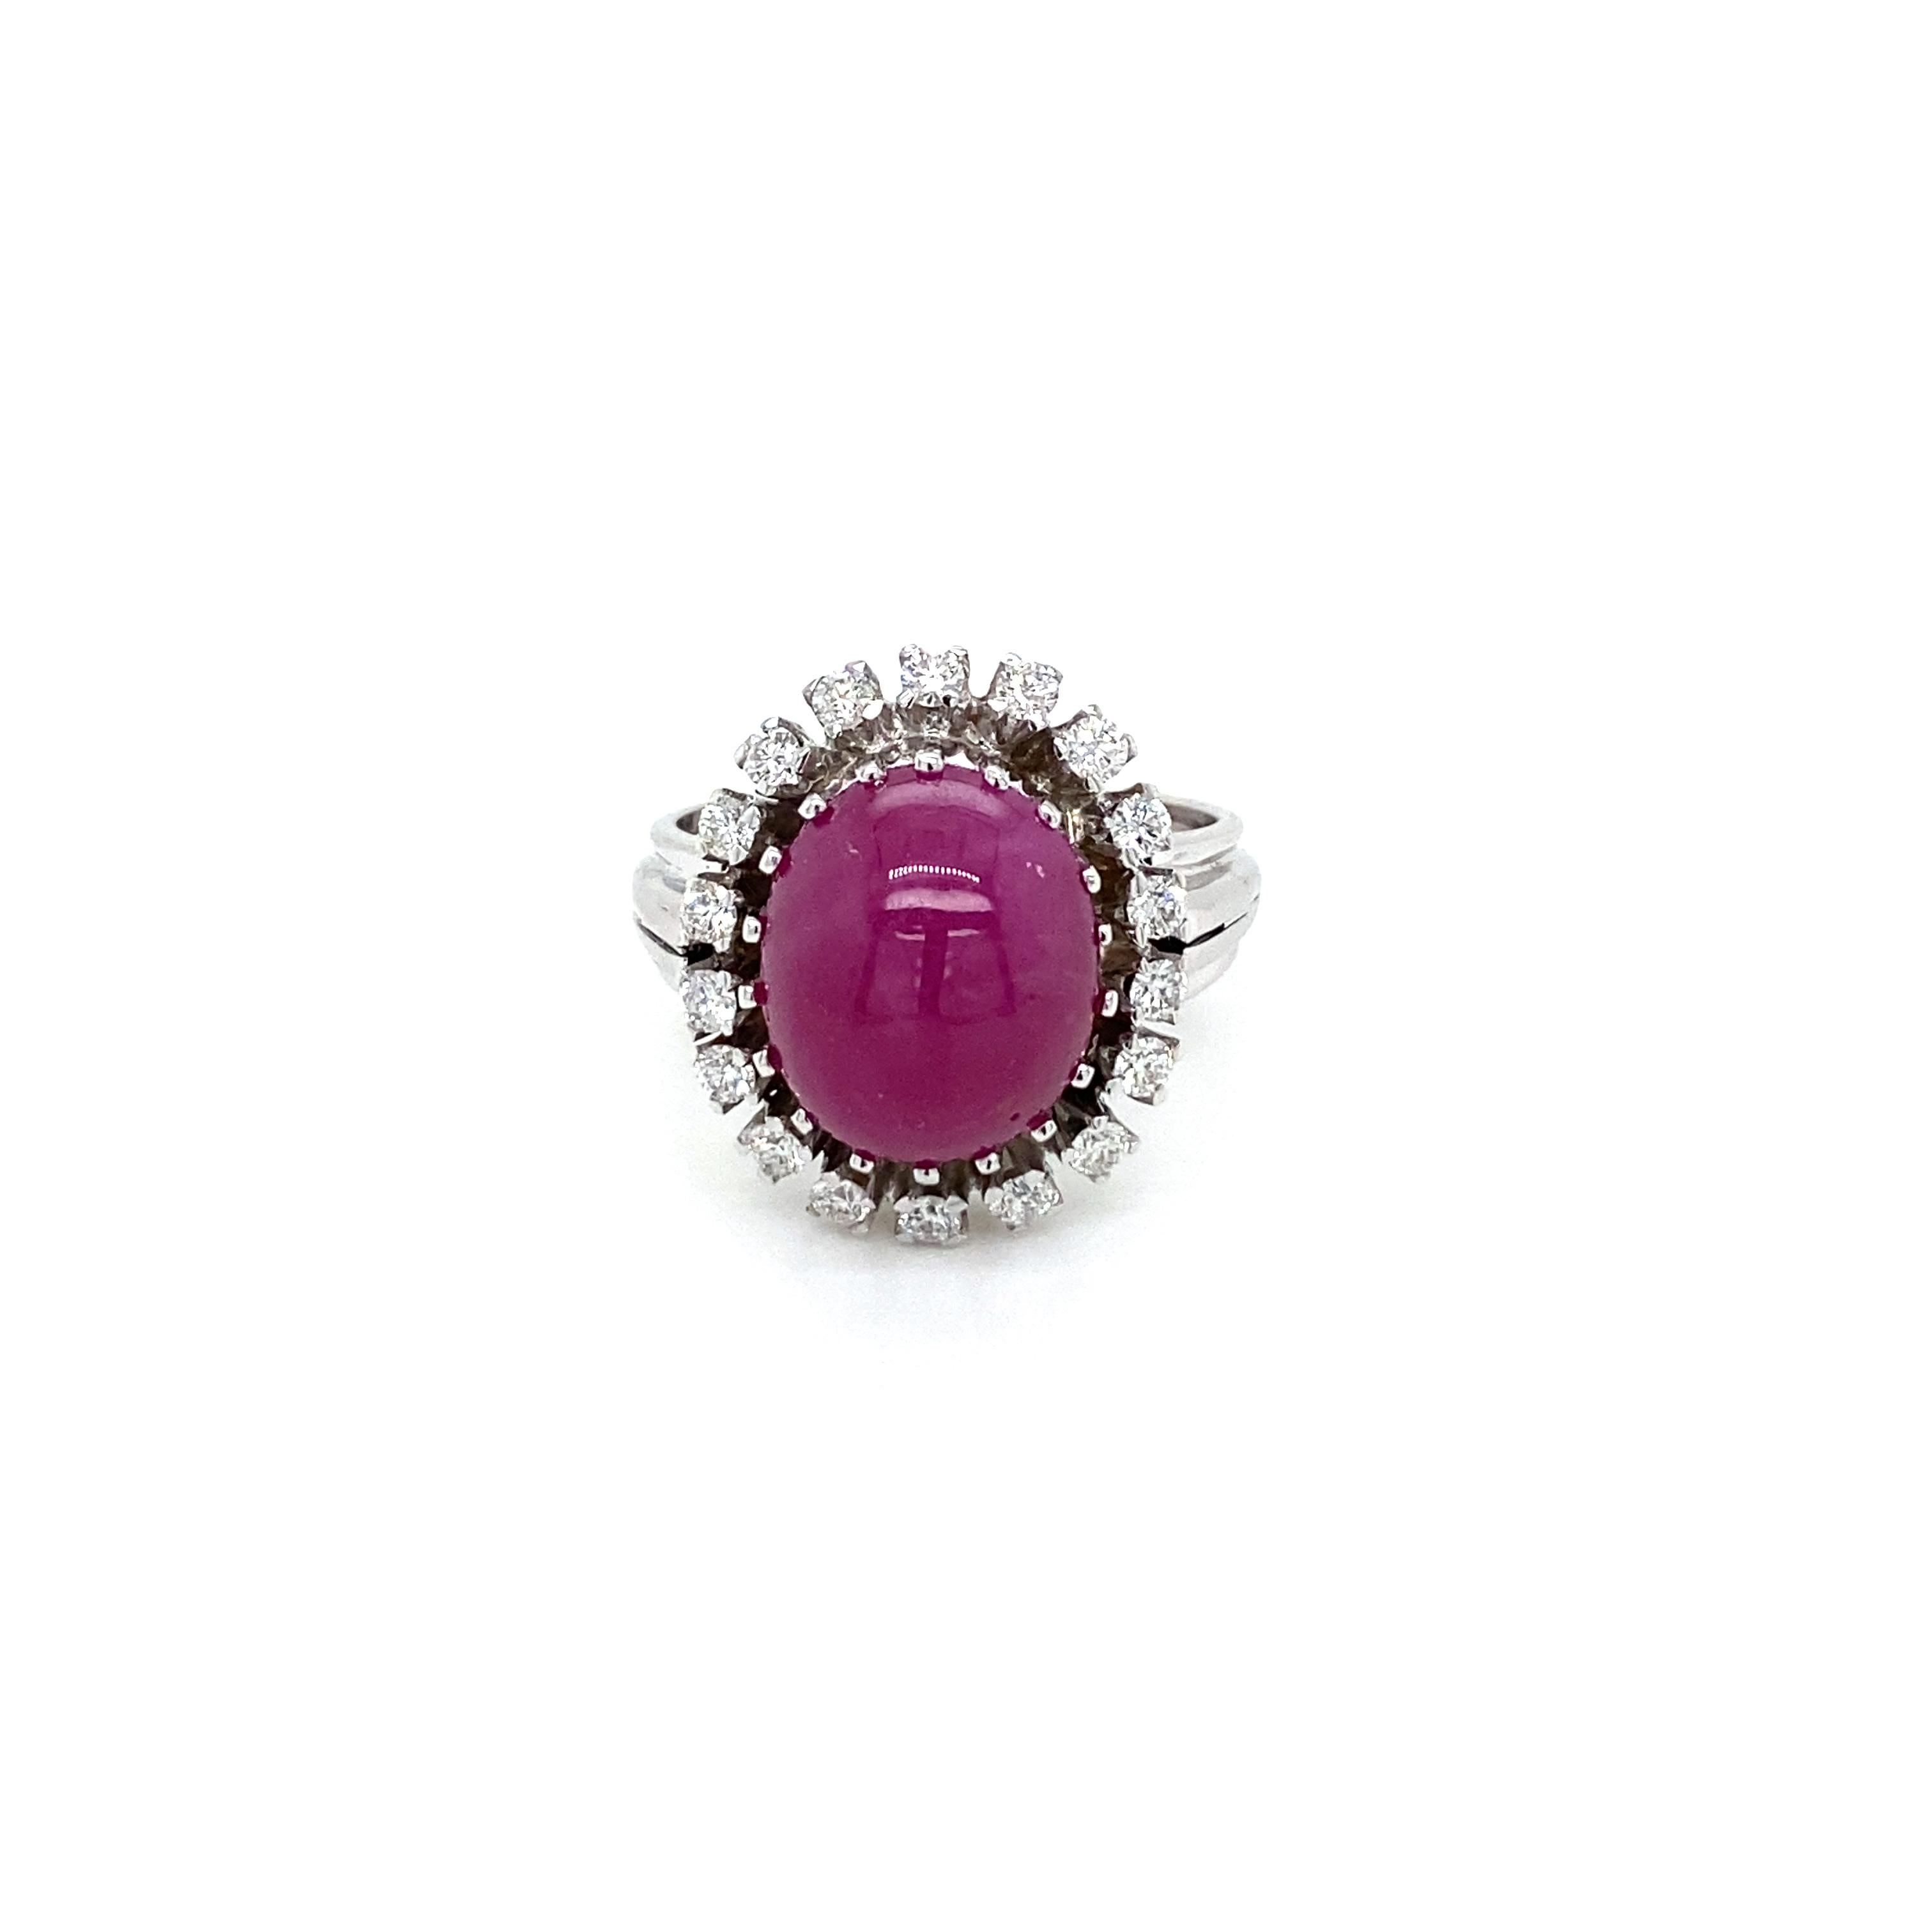 This beautiful cocktail ring is set in the center with one large Natural Cabochon Ruby, perfectly oval shape in intense red color. weight 8.50 ct. surrounded by 0,50 of colorless round brilliant cut diamonds graded G color VVS.

The diamonds are